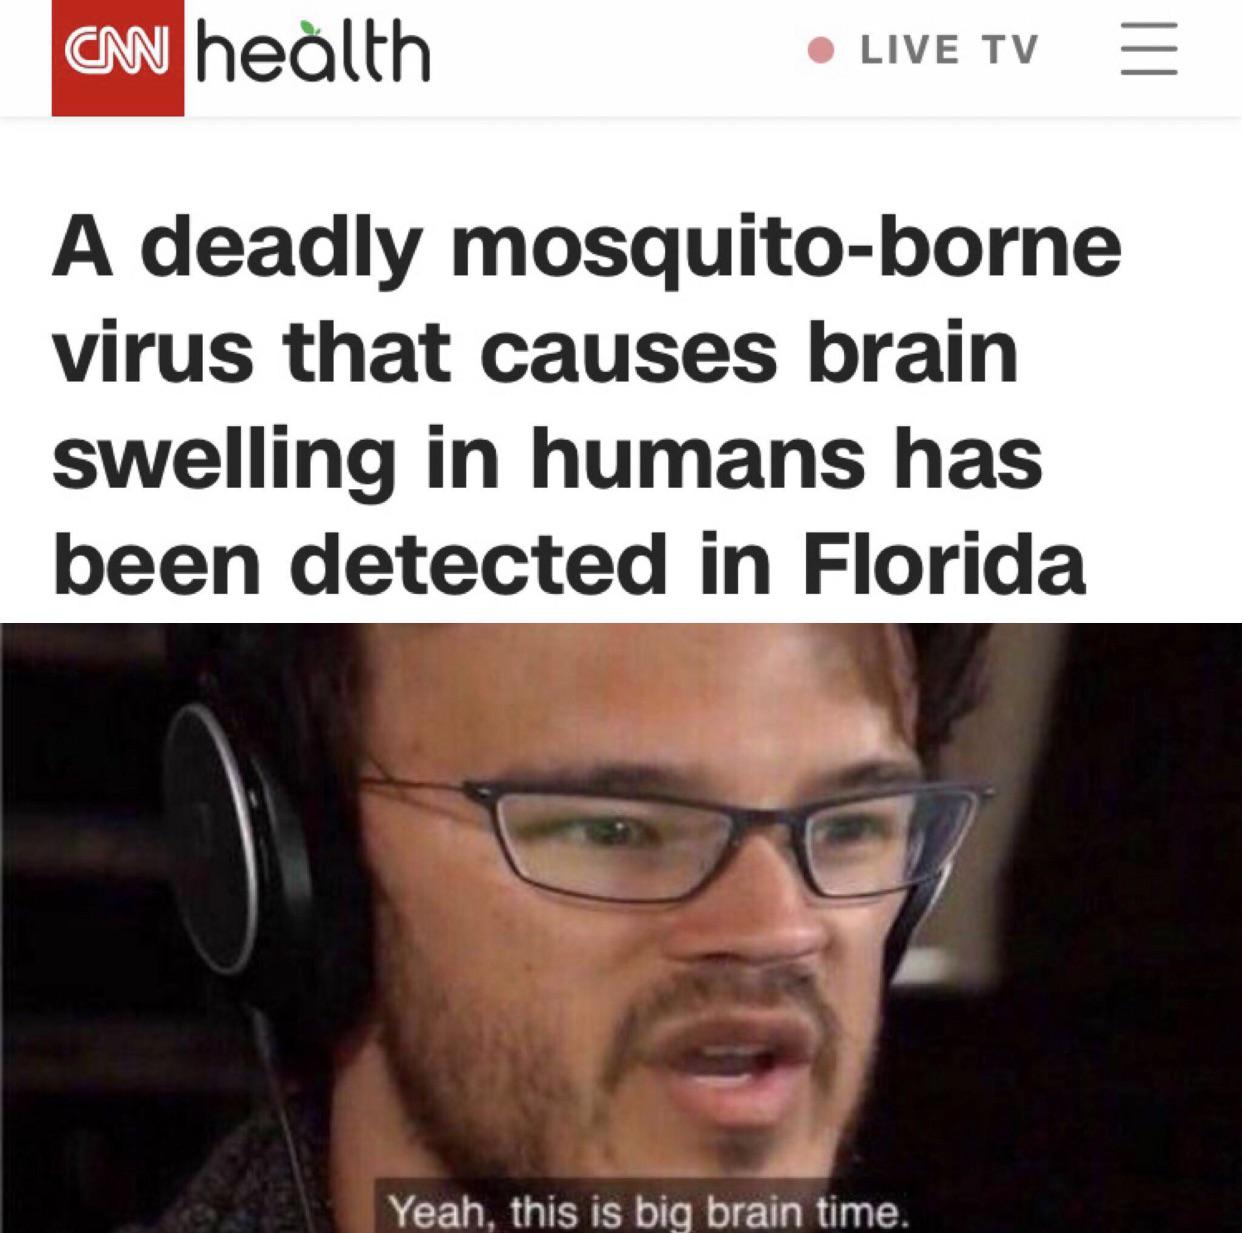 dank memes - big brain time memes - Cnn health Live Tv Iii A deadly mosquitoborne virus that causes brain swelling in humans has been detected in Florida Yeah, this is big brain time.